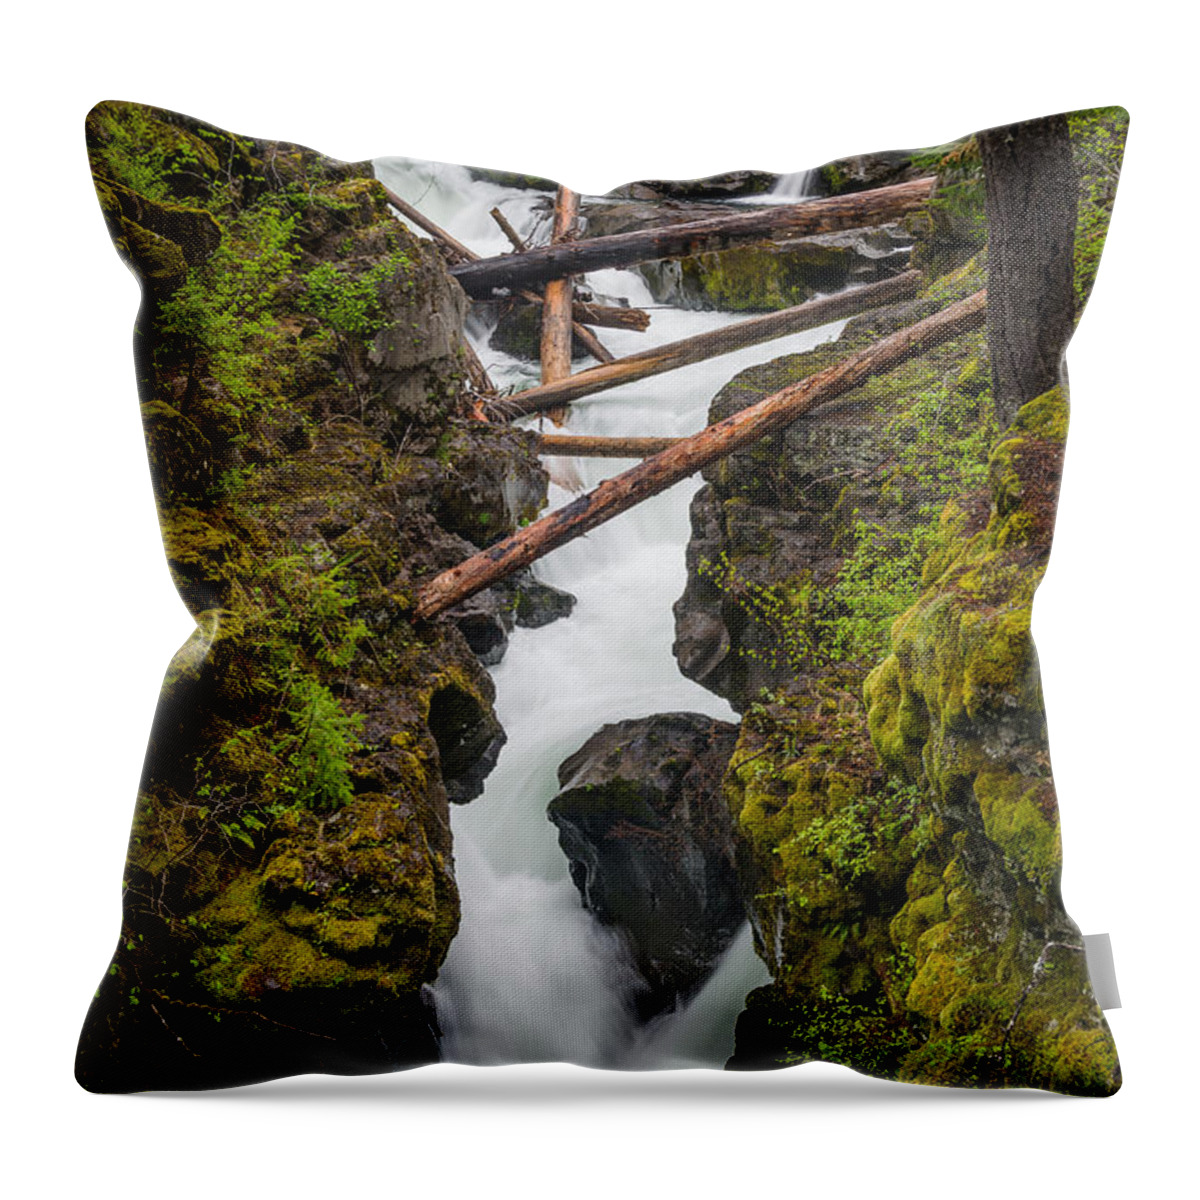 Rogue Gorge Throw Pillow featuring the photograph Broiling Rogue Gorge by Greg Nyquist